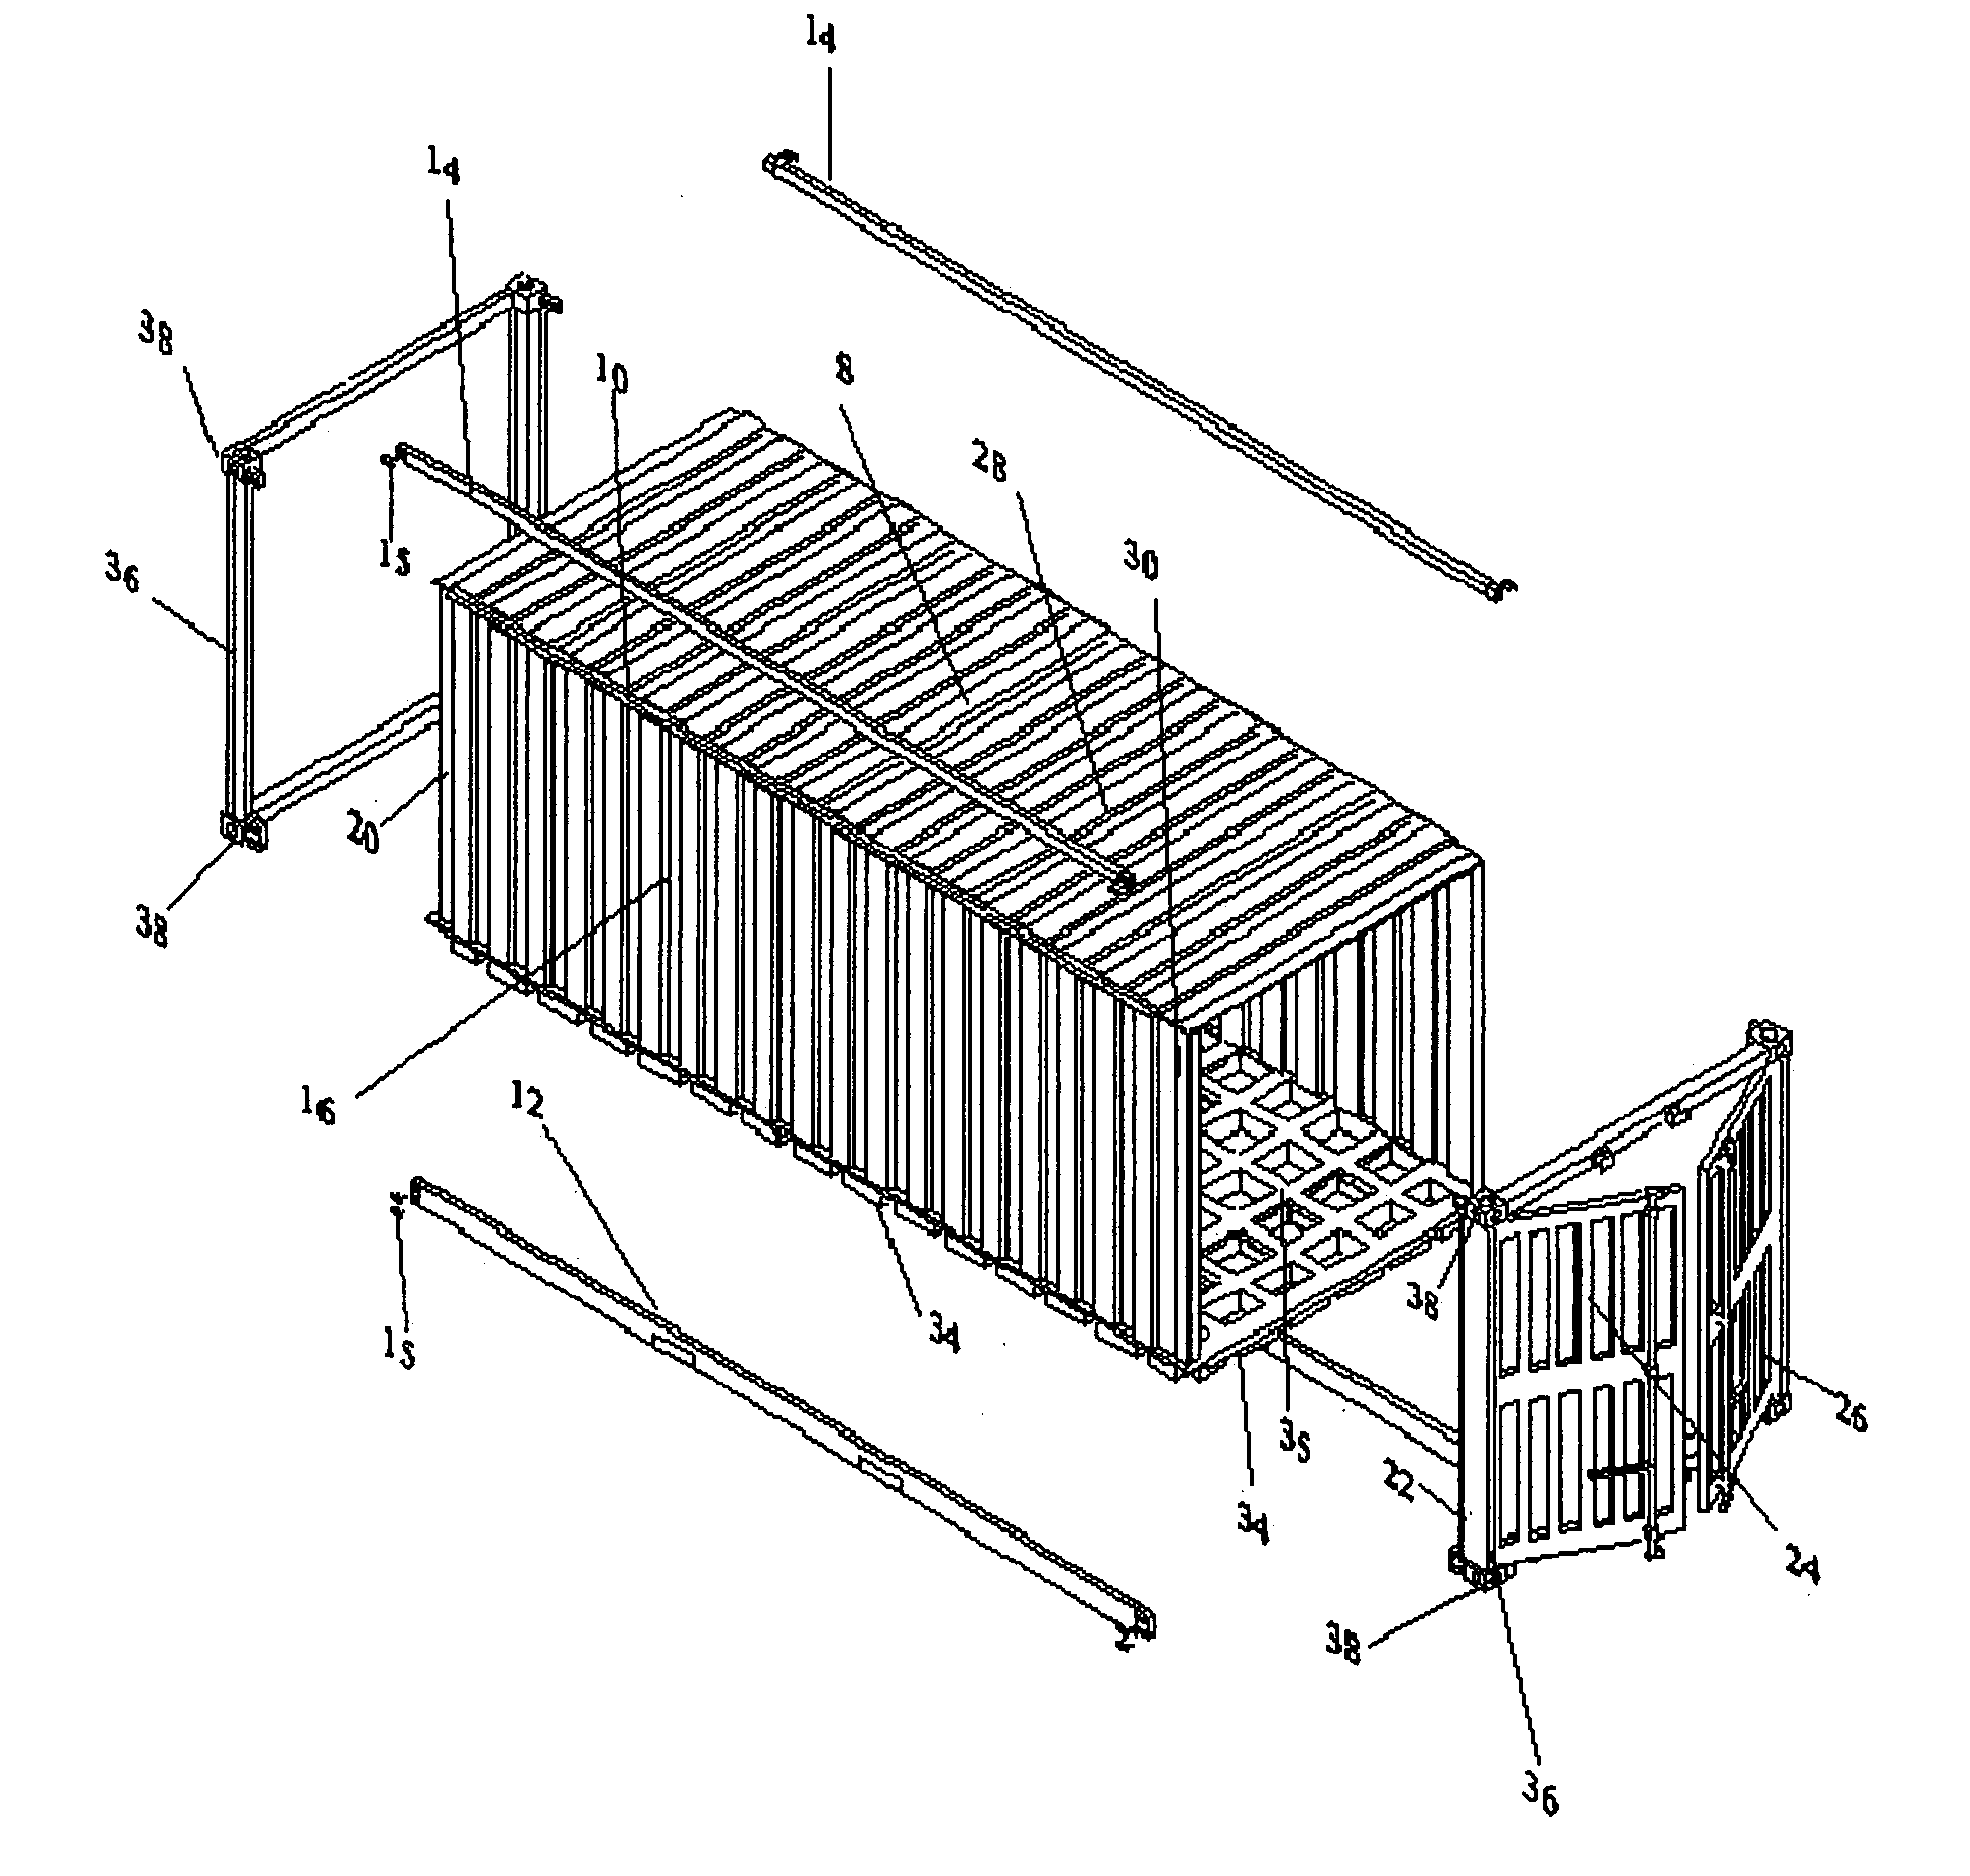 Smart hybrid intermodal recyclable shipping container, and method and apparatus therefor